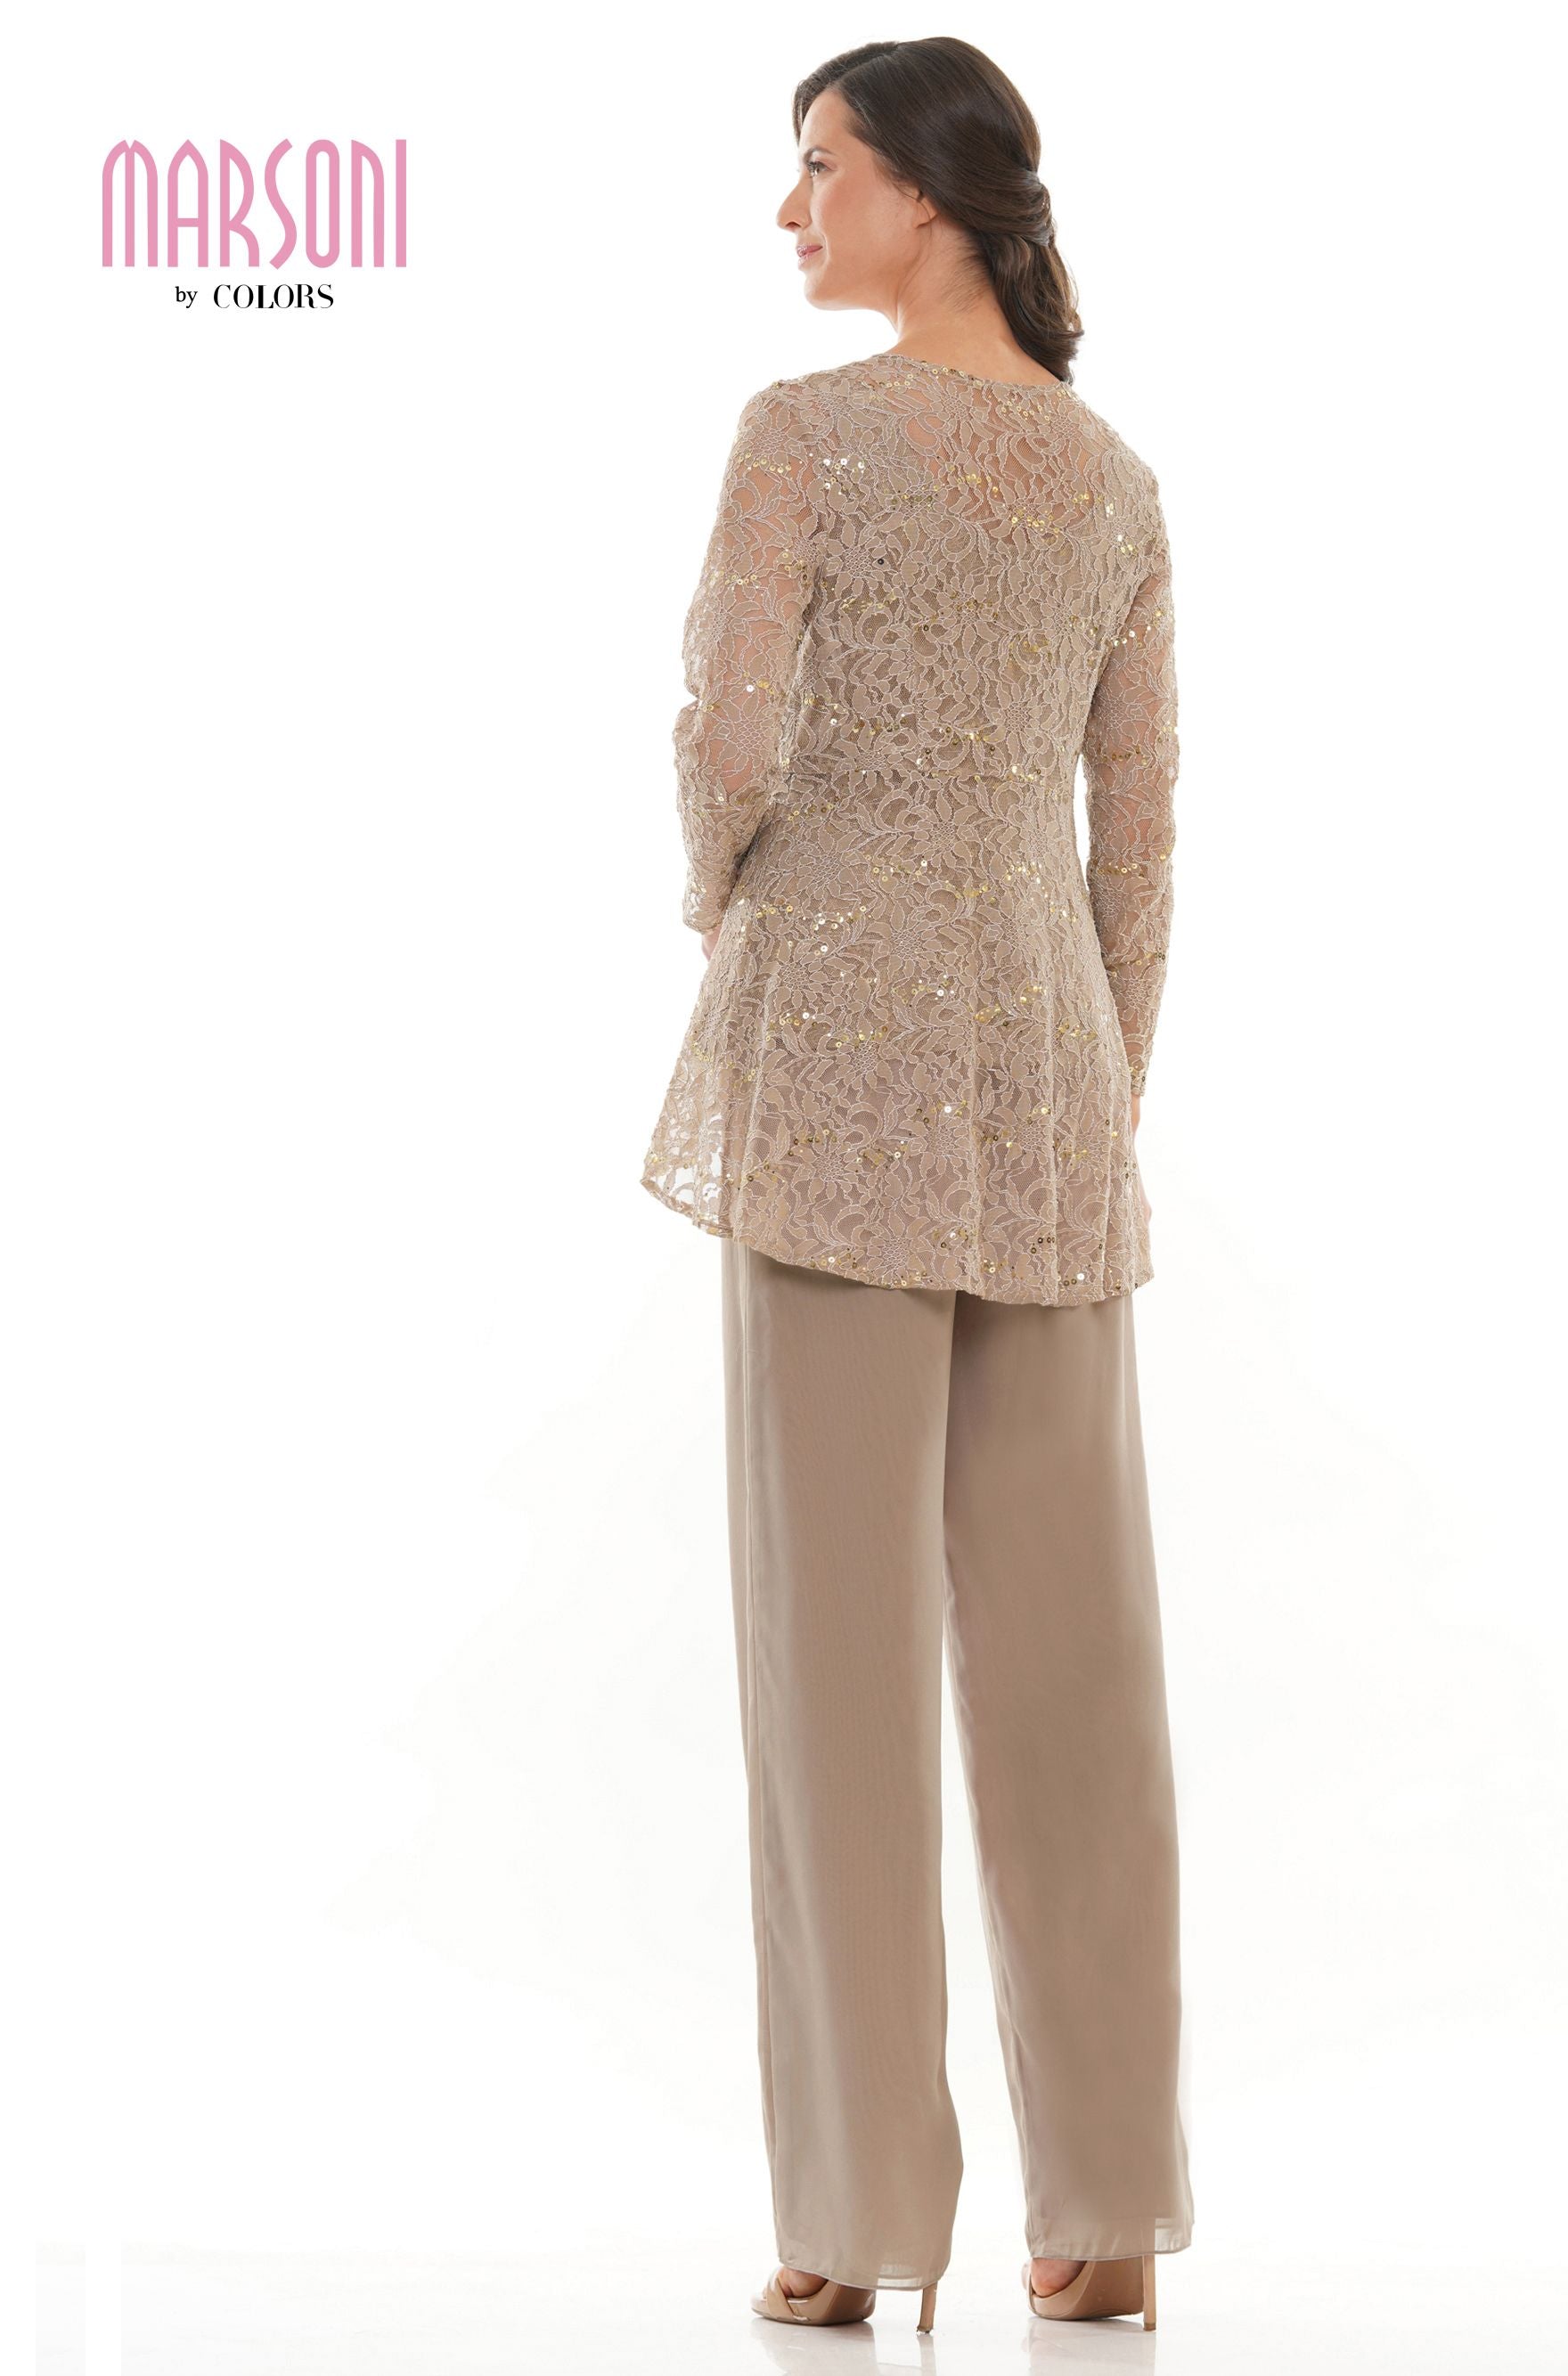 Clearance Sale Marsoni by Colors -M305 Pantsuit With Stretch Lace Jacket